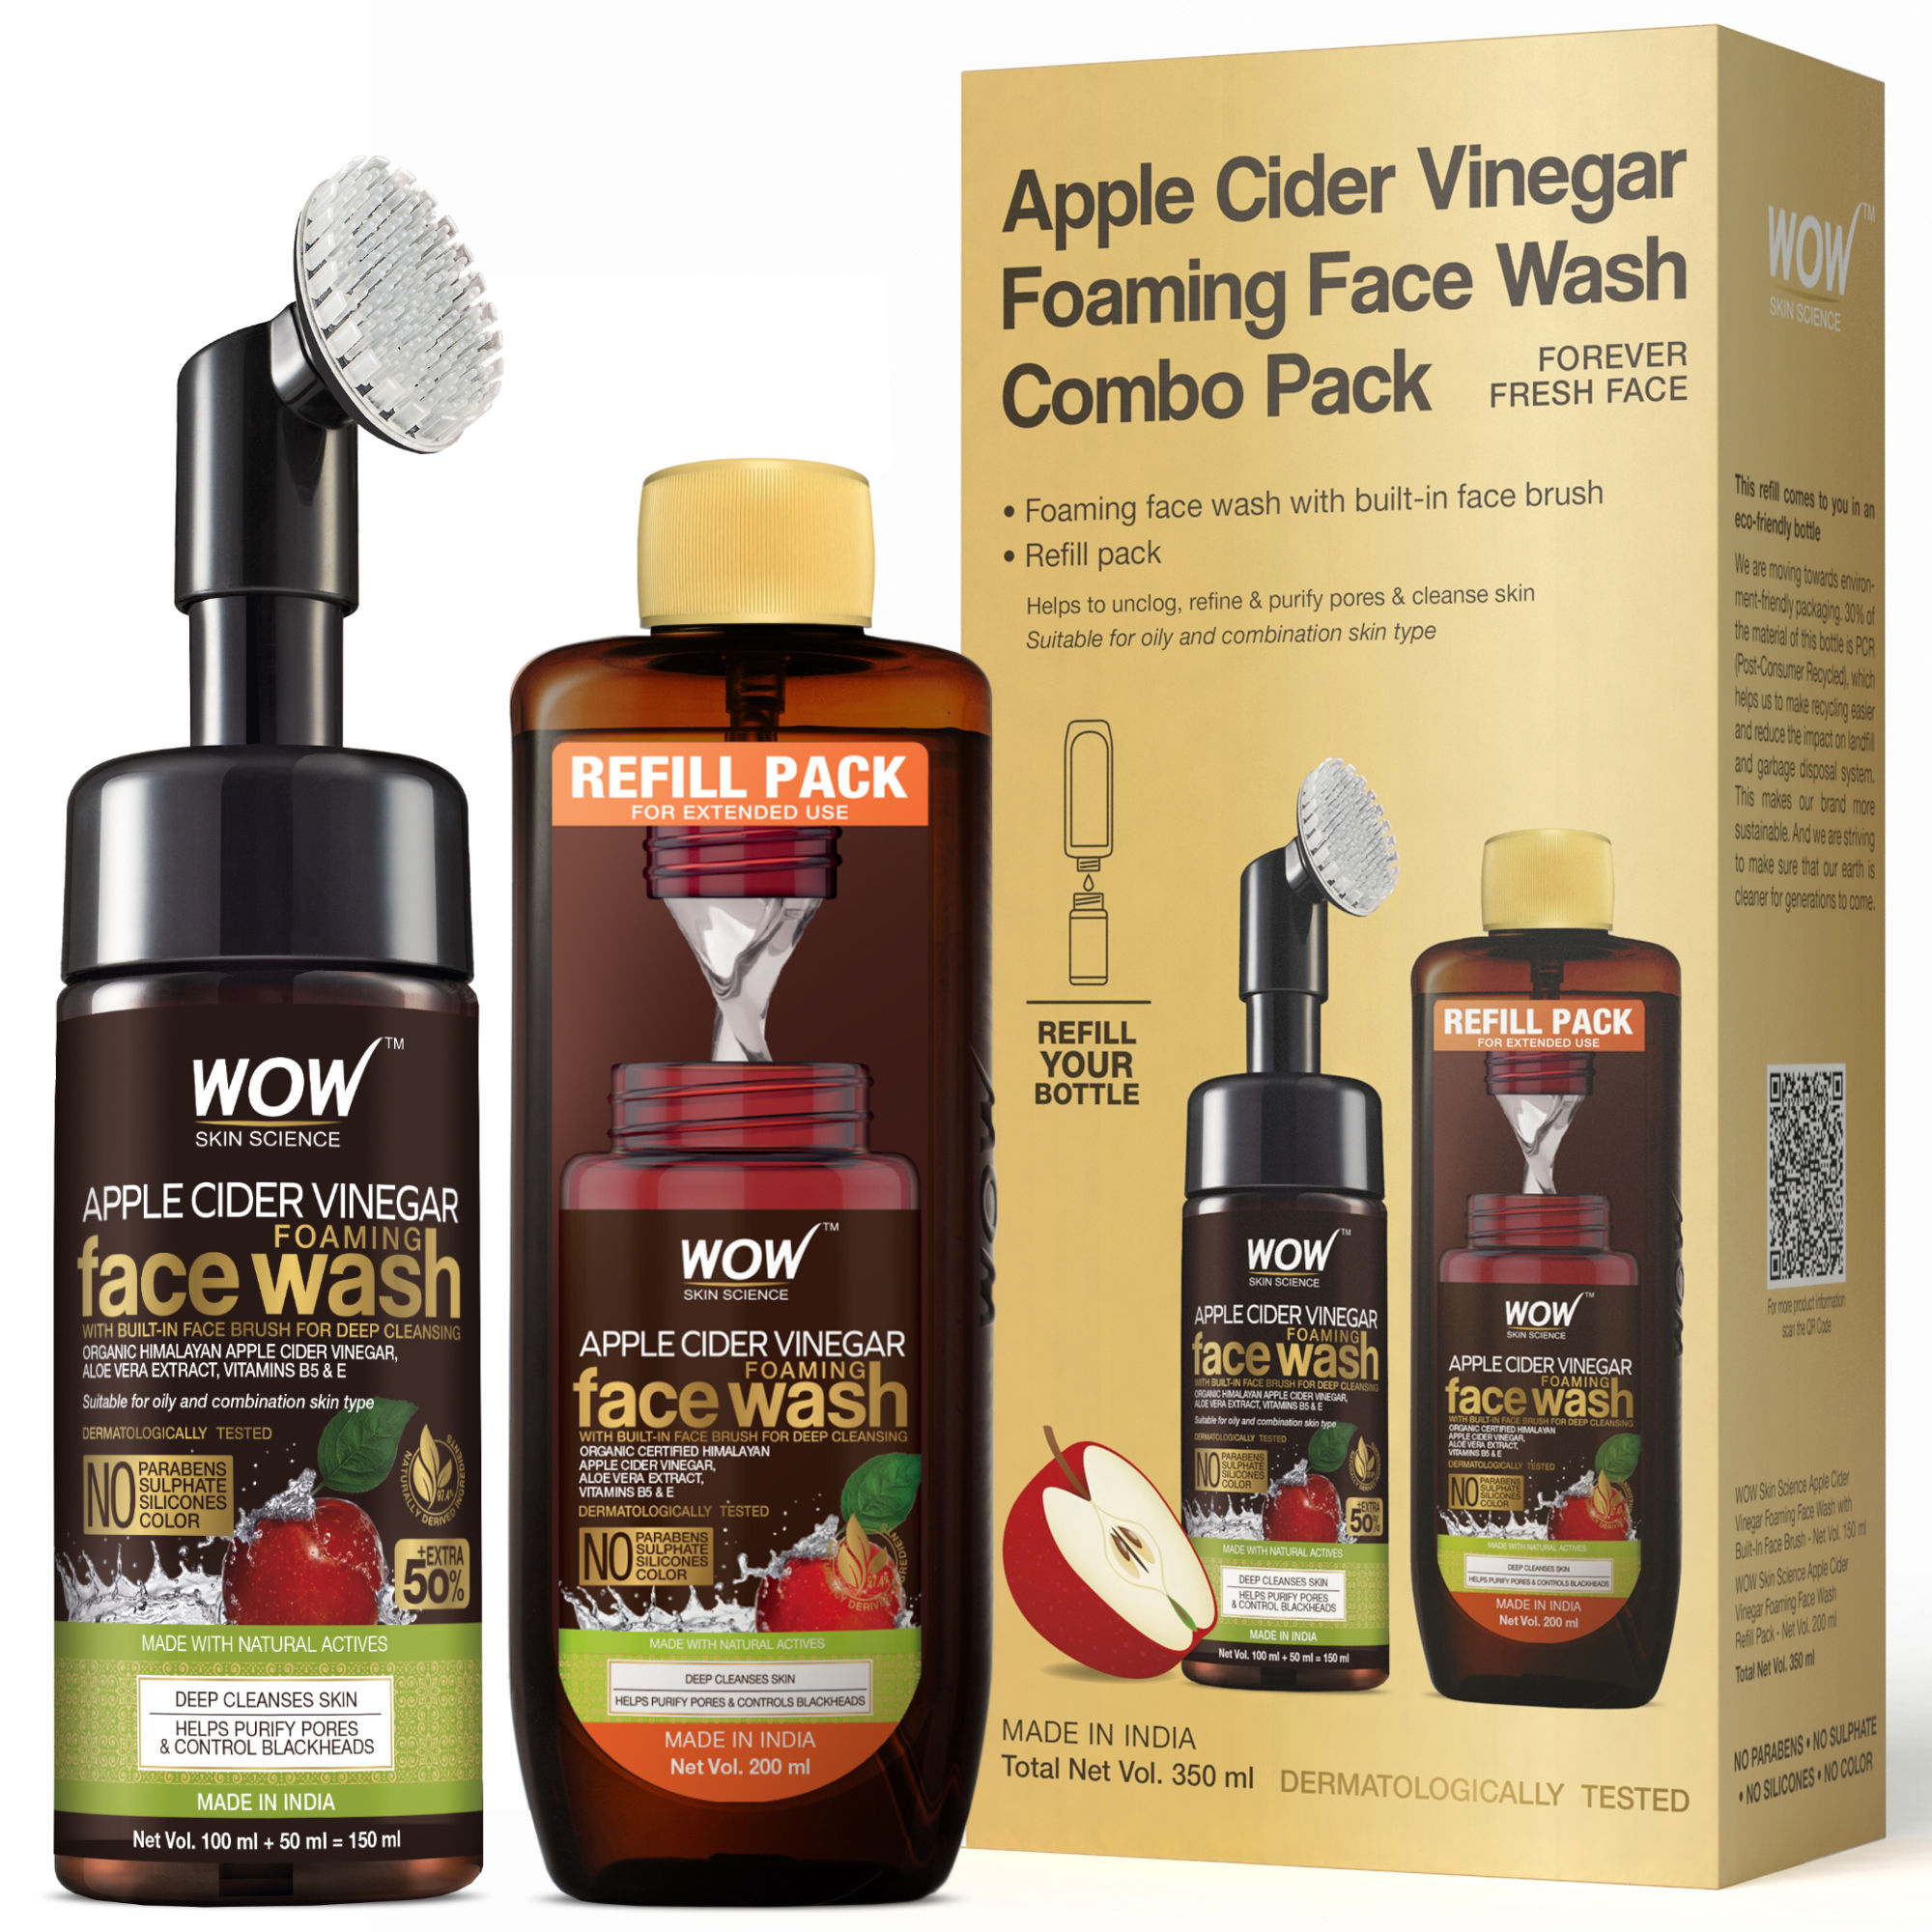 WOW Skin Science Apple Cider Vinegar Foaming Face Wash + Refill Combo Pack